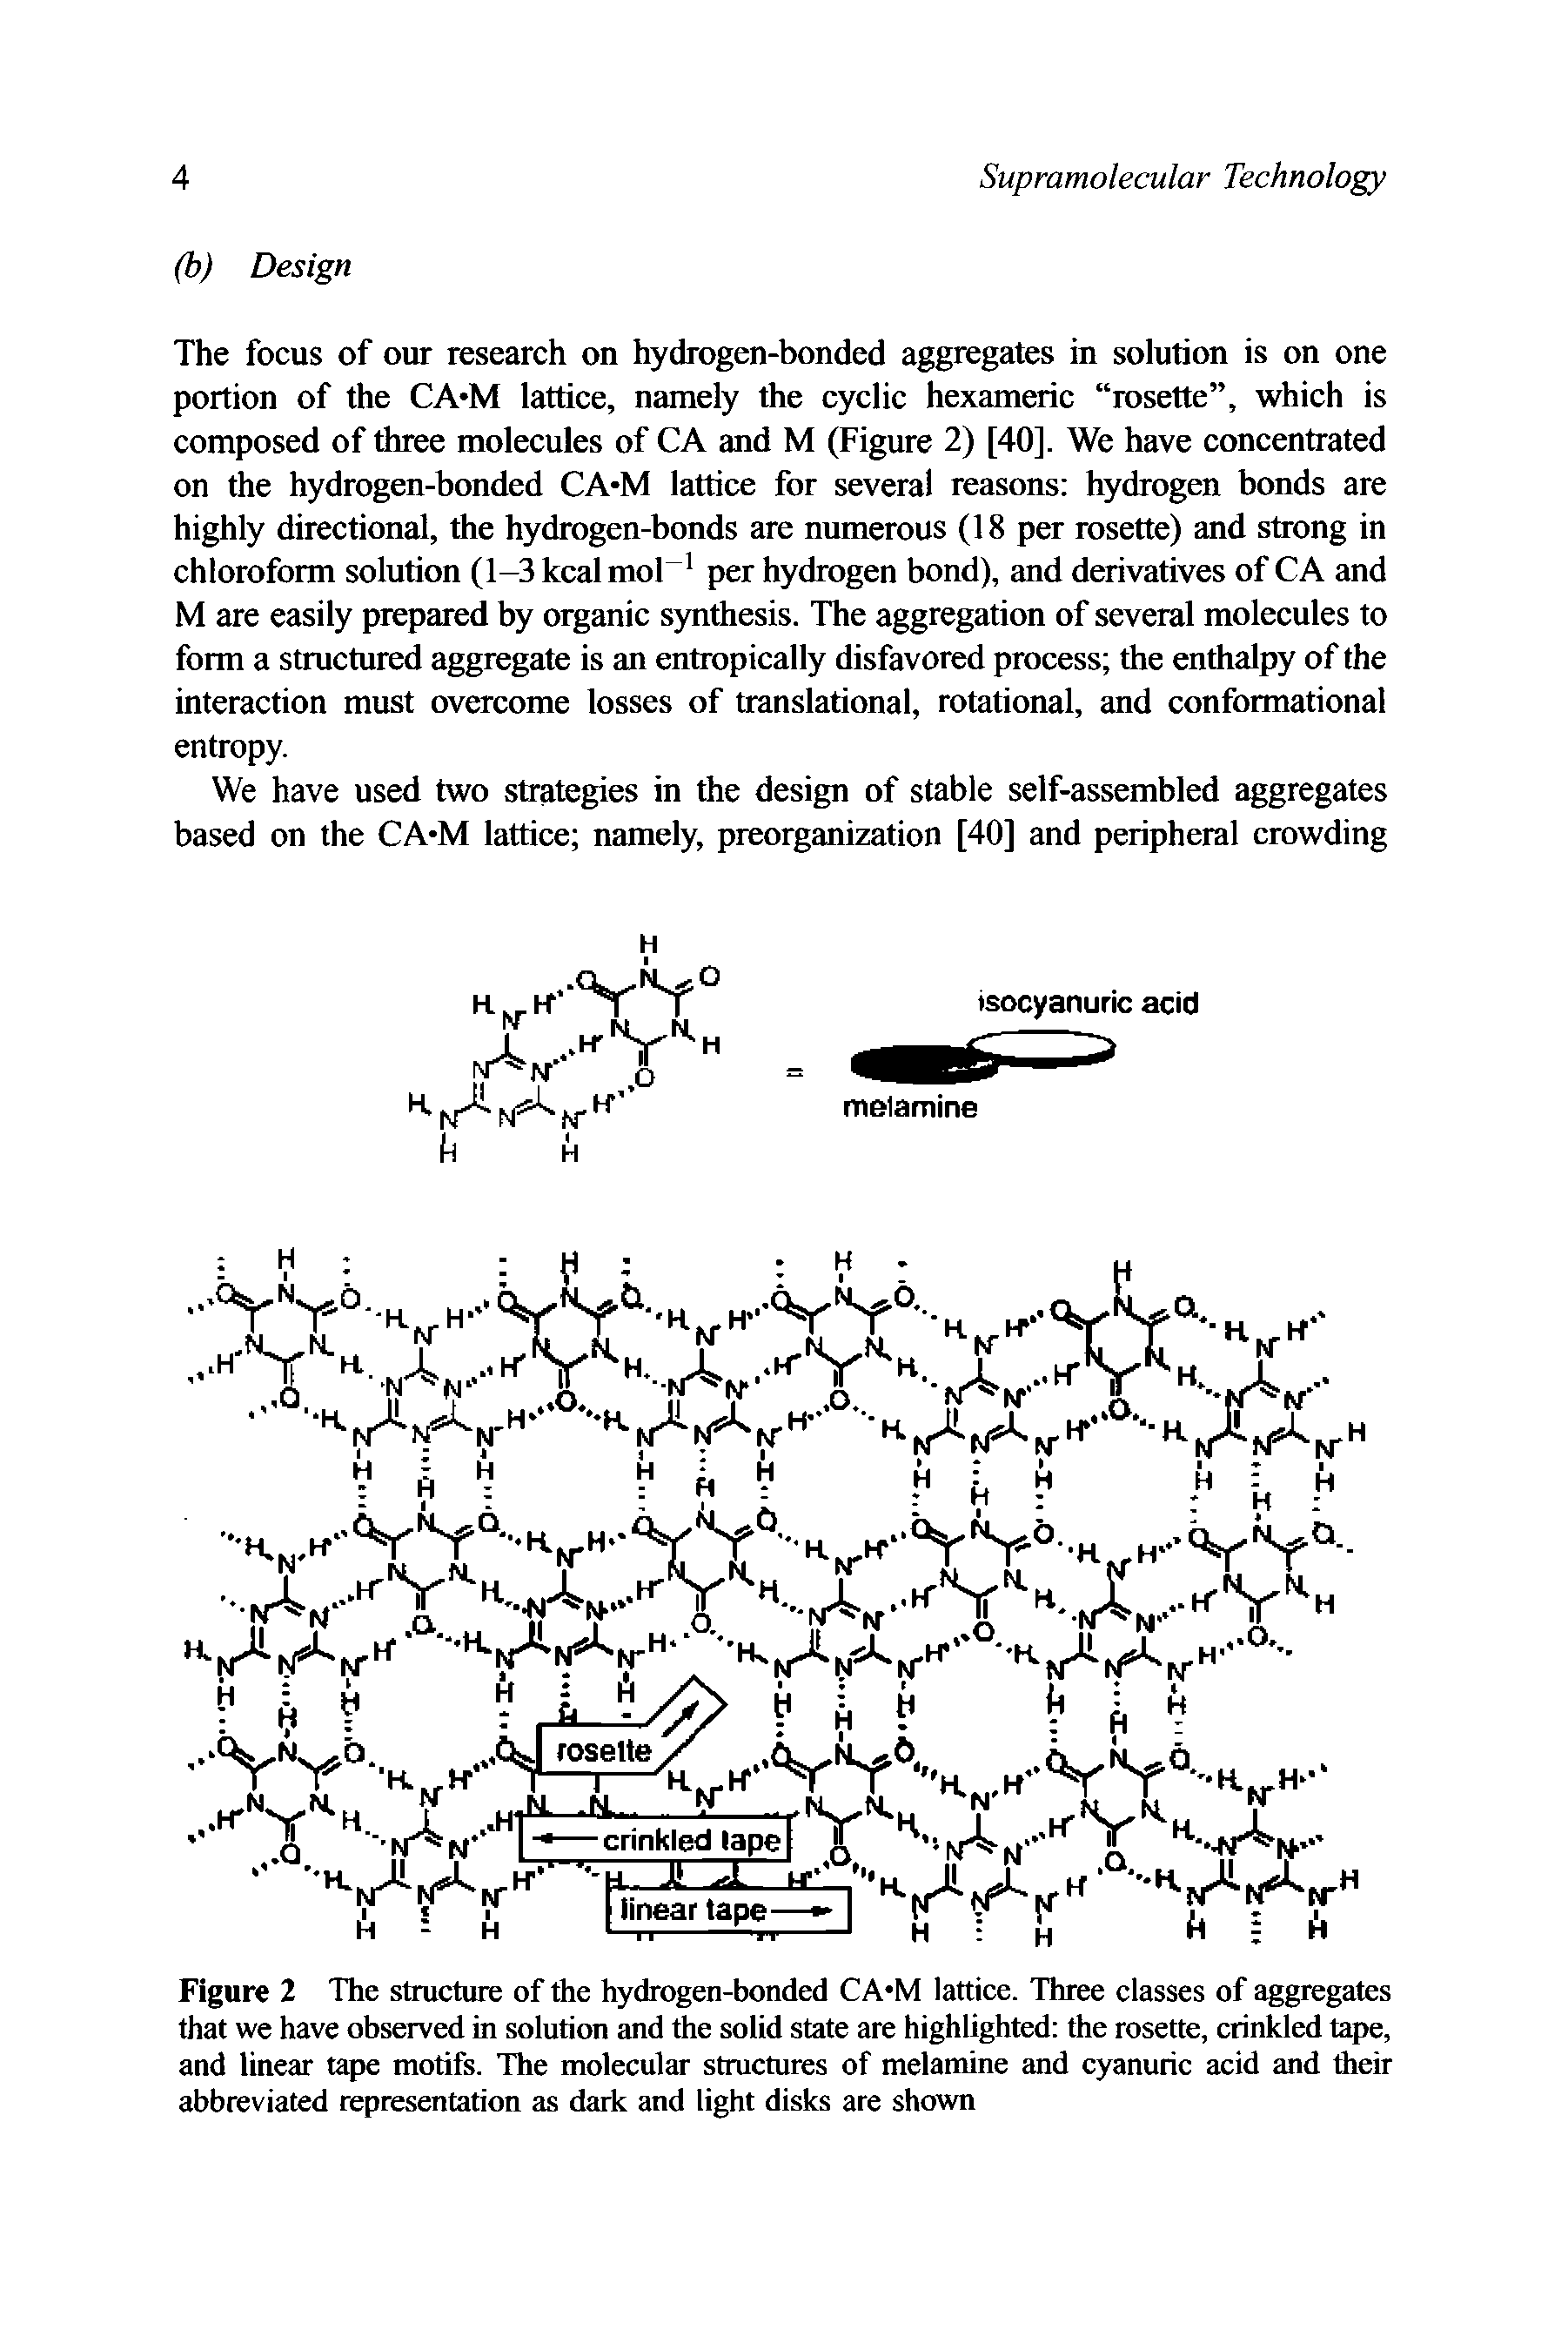 Figure 2 The structure of the hydrogen-bonded CA M lattice. Three classes of aggregates that we have observed in solution and the solid state are highlighted the rosette, crinkled tape, and linear tape motifs. The molecular strucmres of melamine and cyanuric acid and their abbreviated representation as dark and light disks are shown...